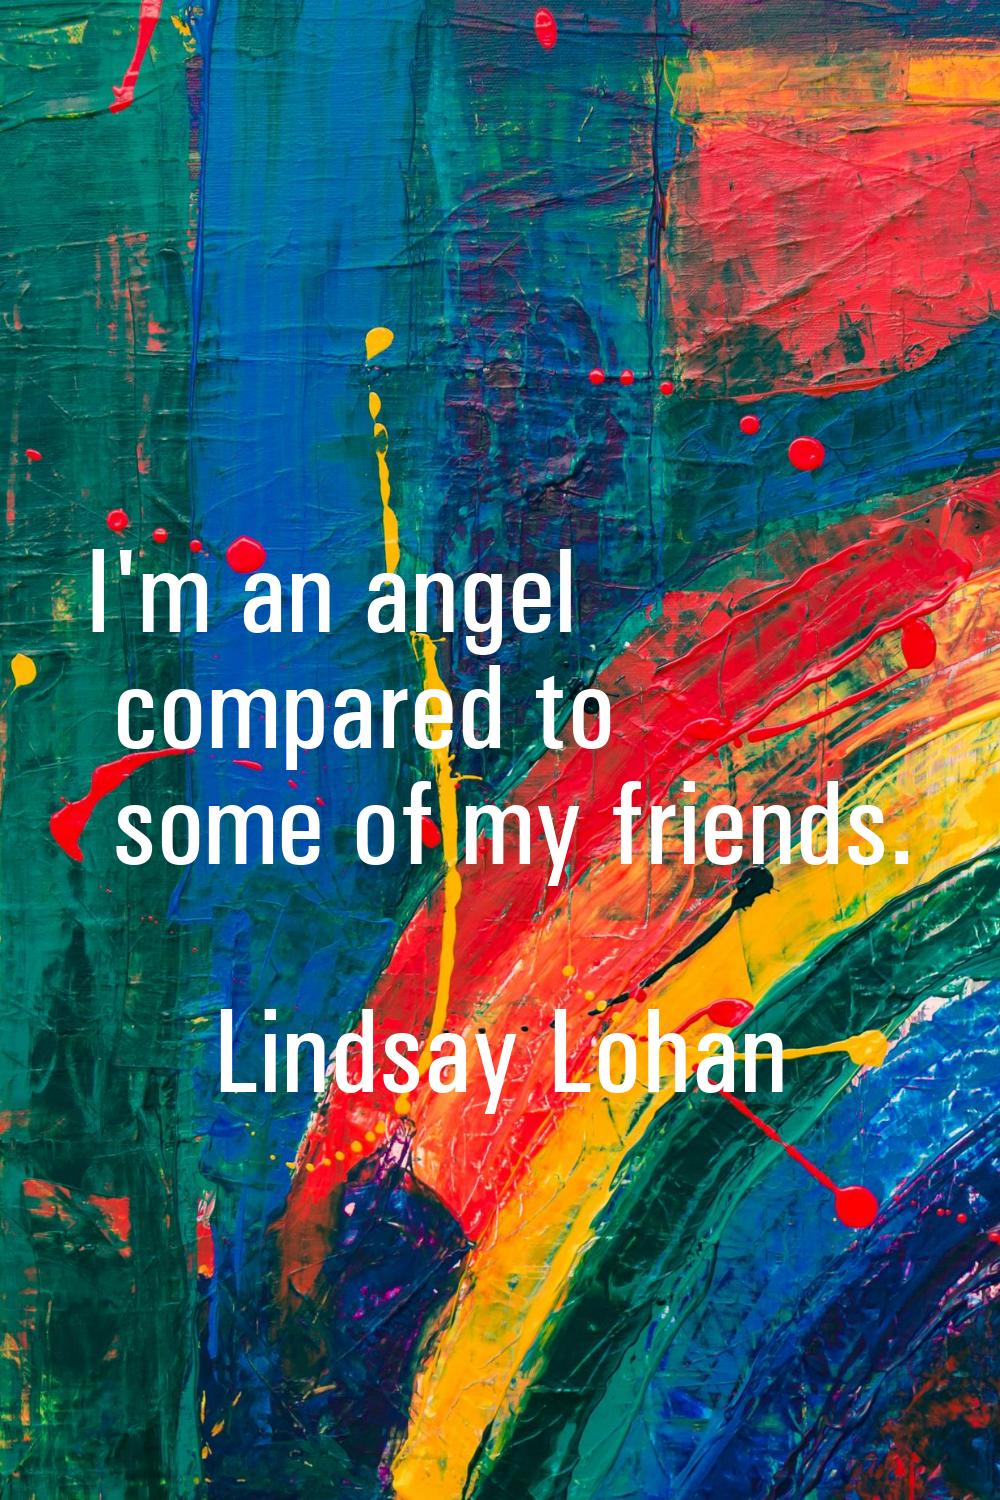 I'm an angel compared to some of my friends.